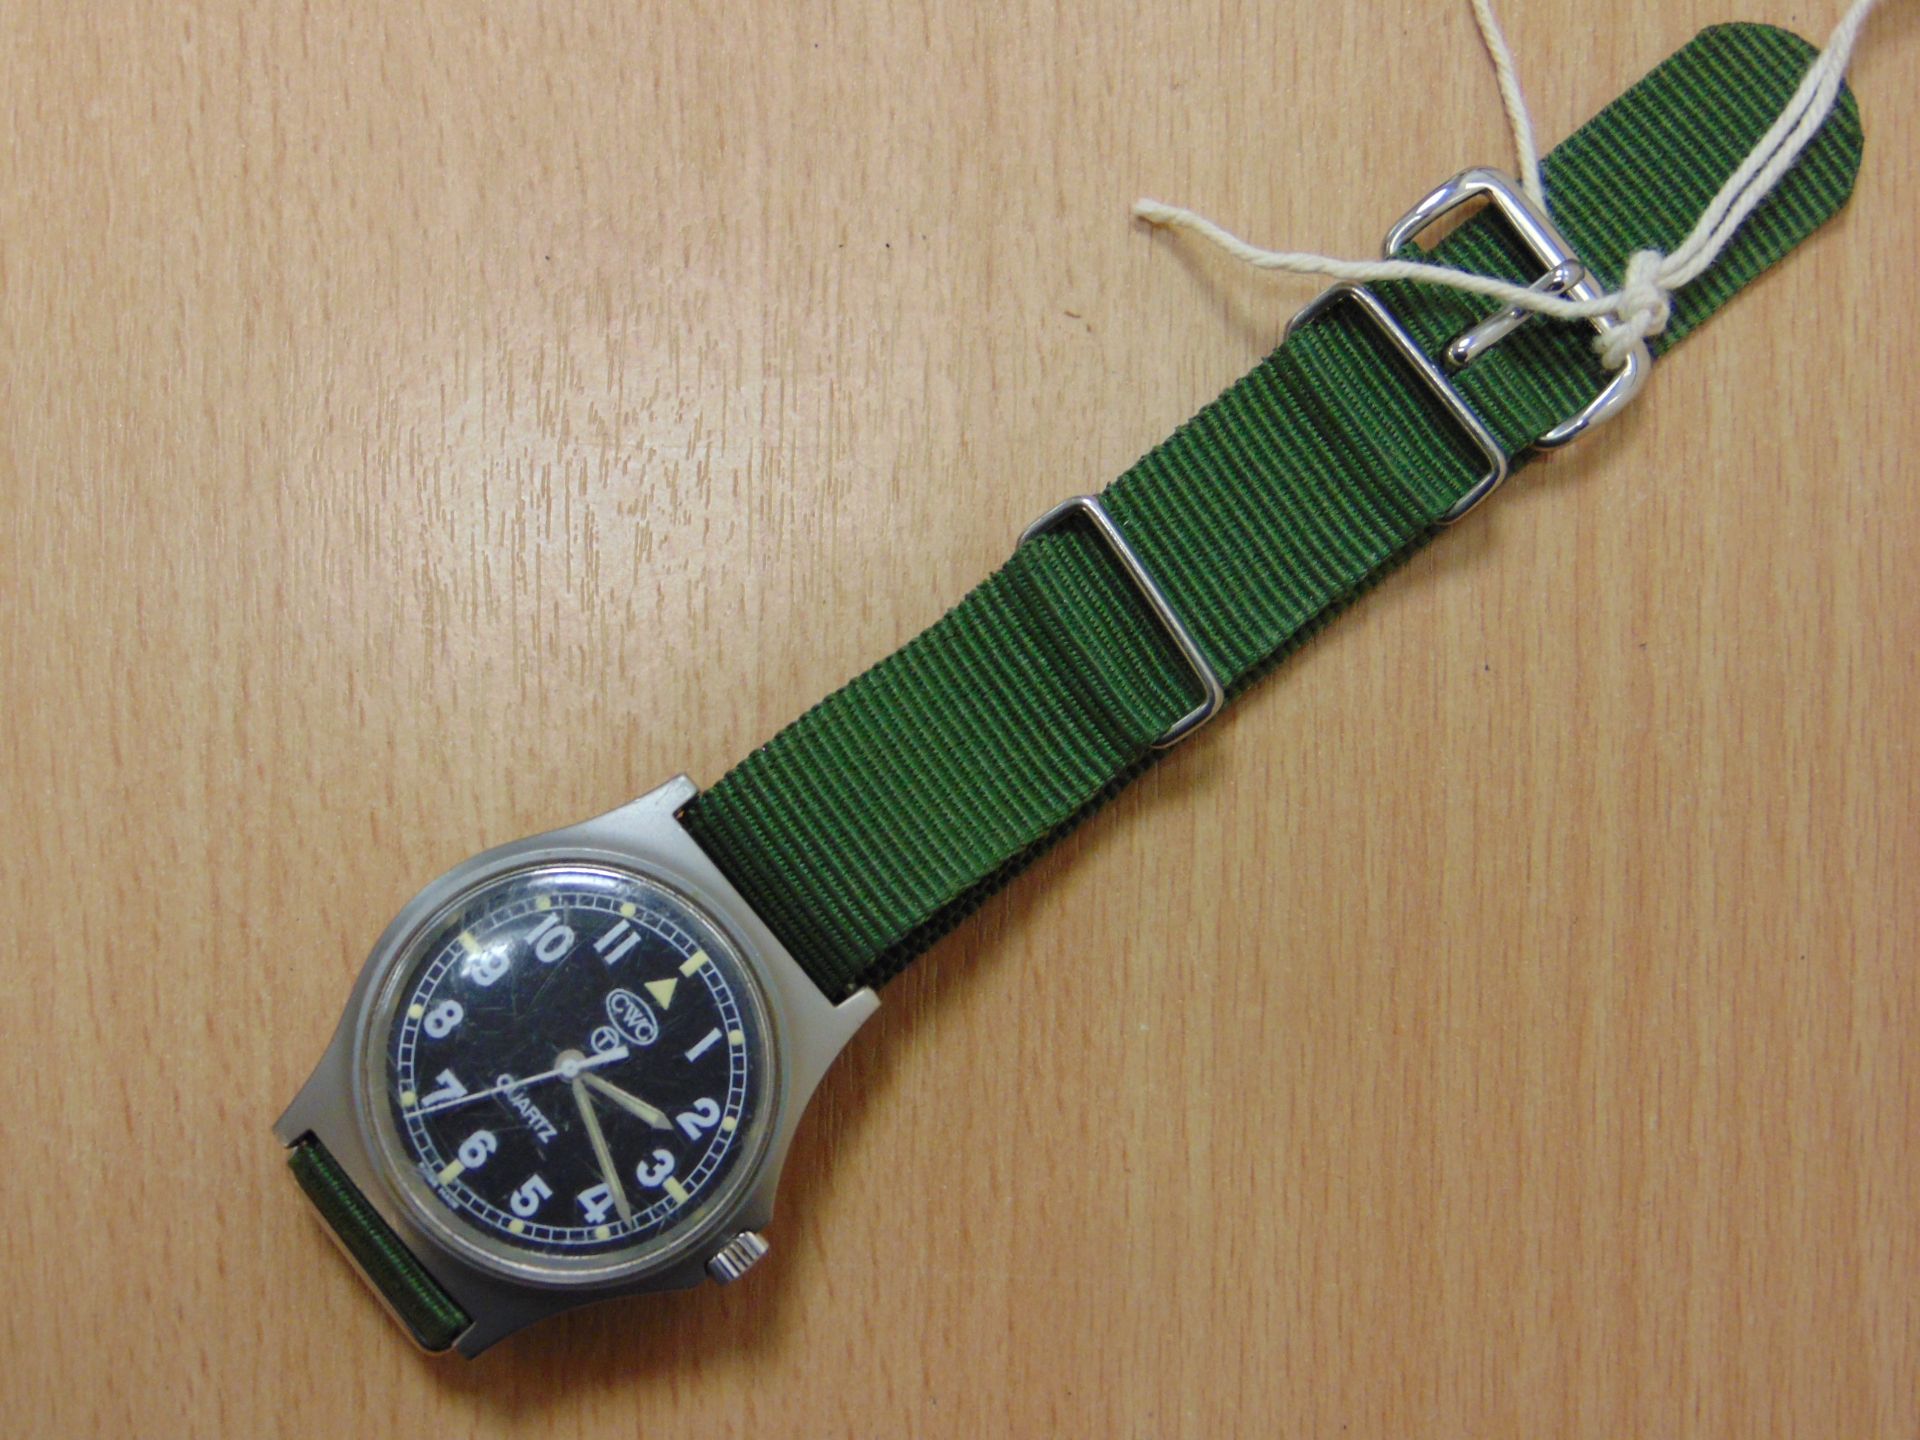 VERY NICE CWC W10 BRITISH ARMY SERVICE WATCH NATO MARKED DATED 1997 - Image 2 of 8